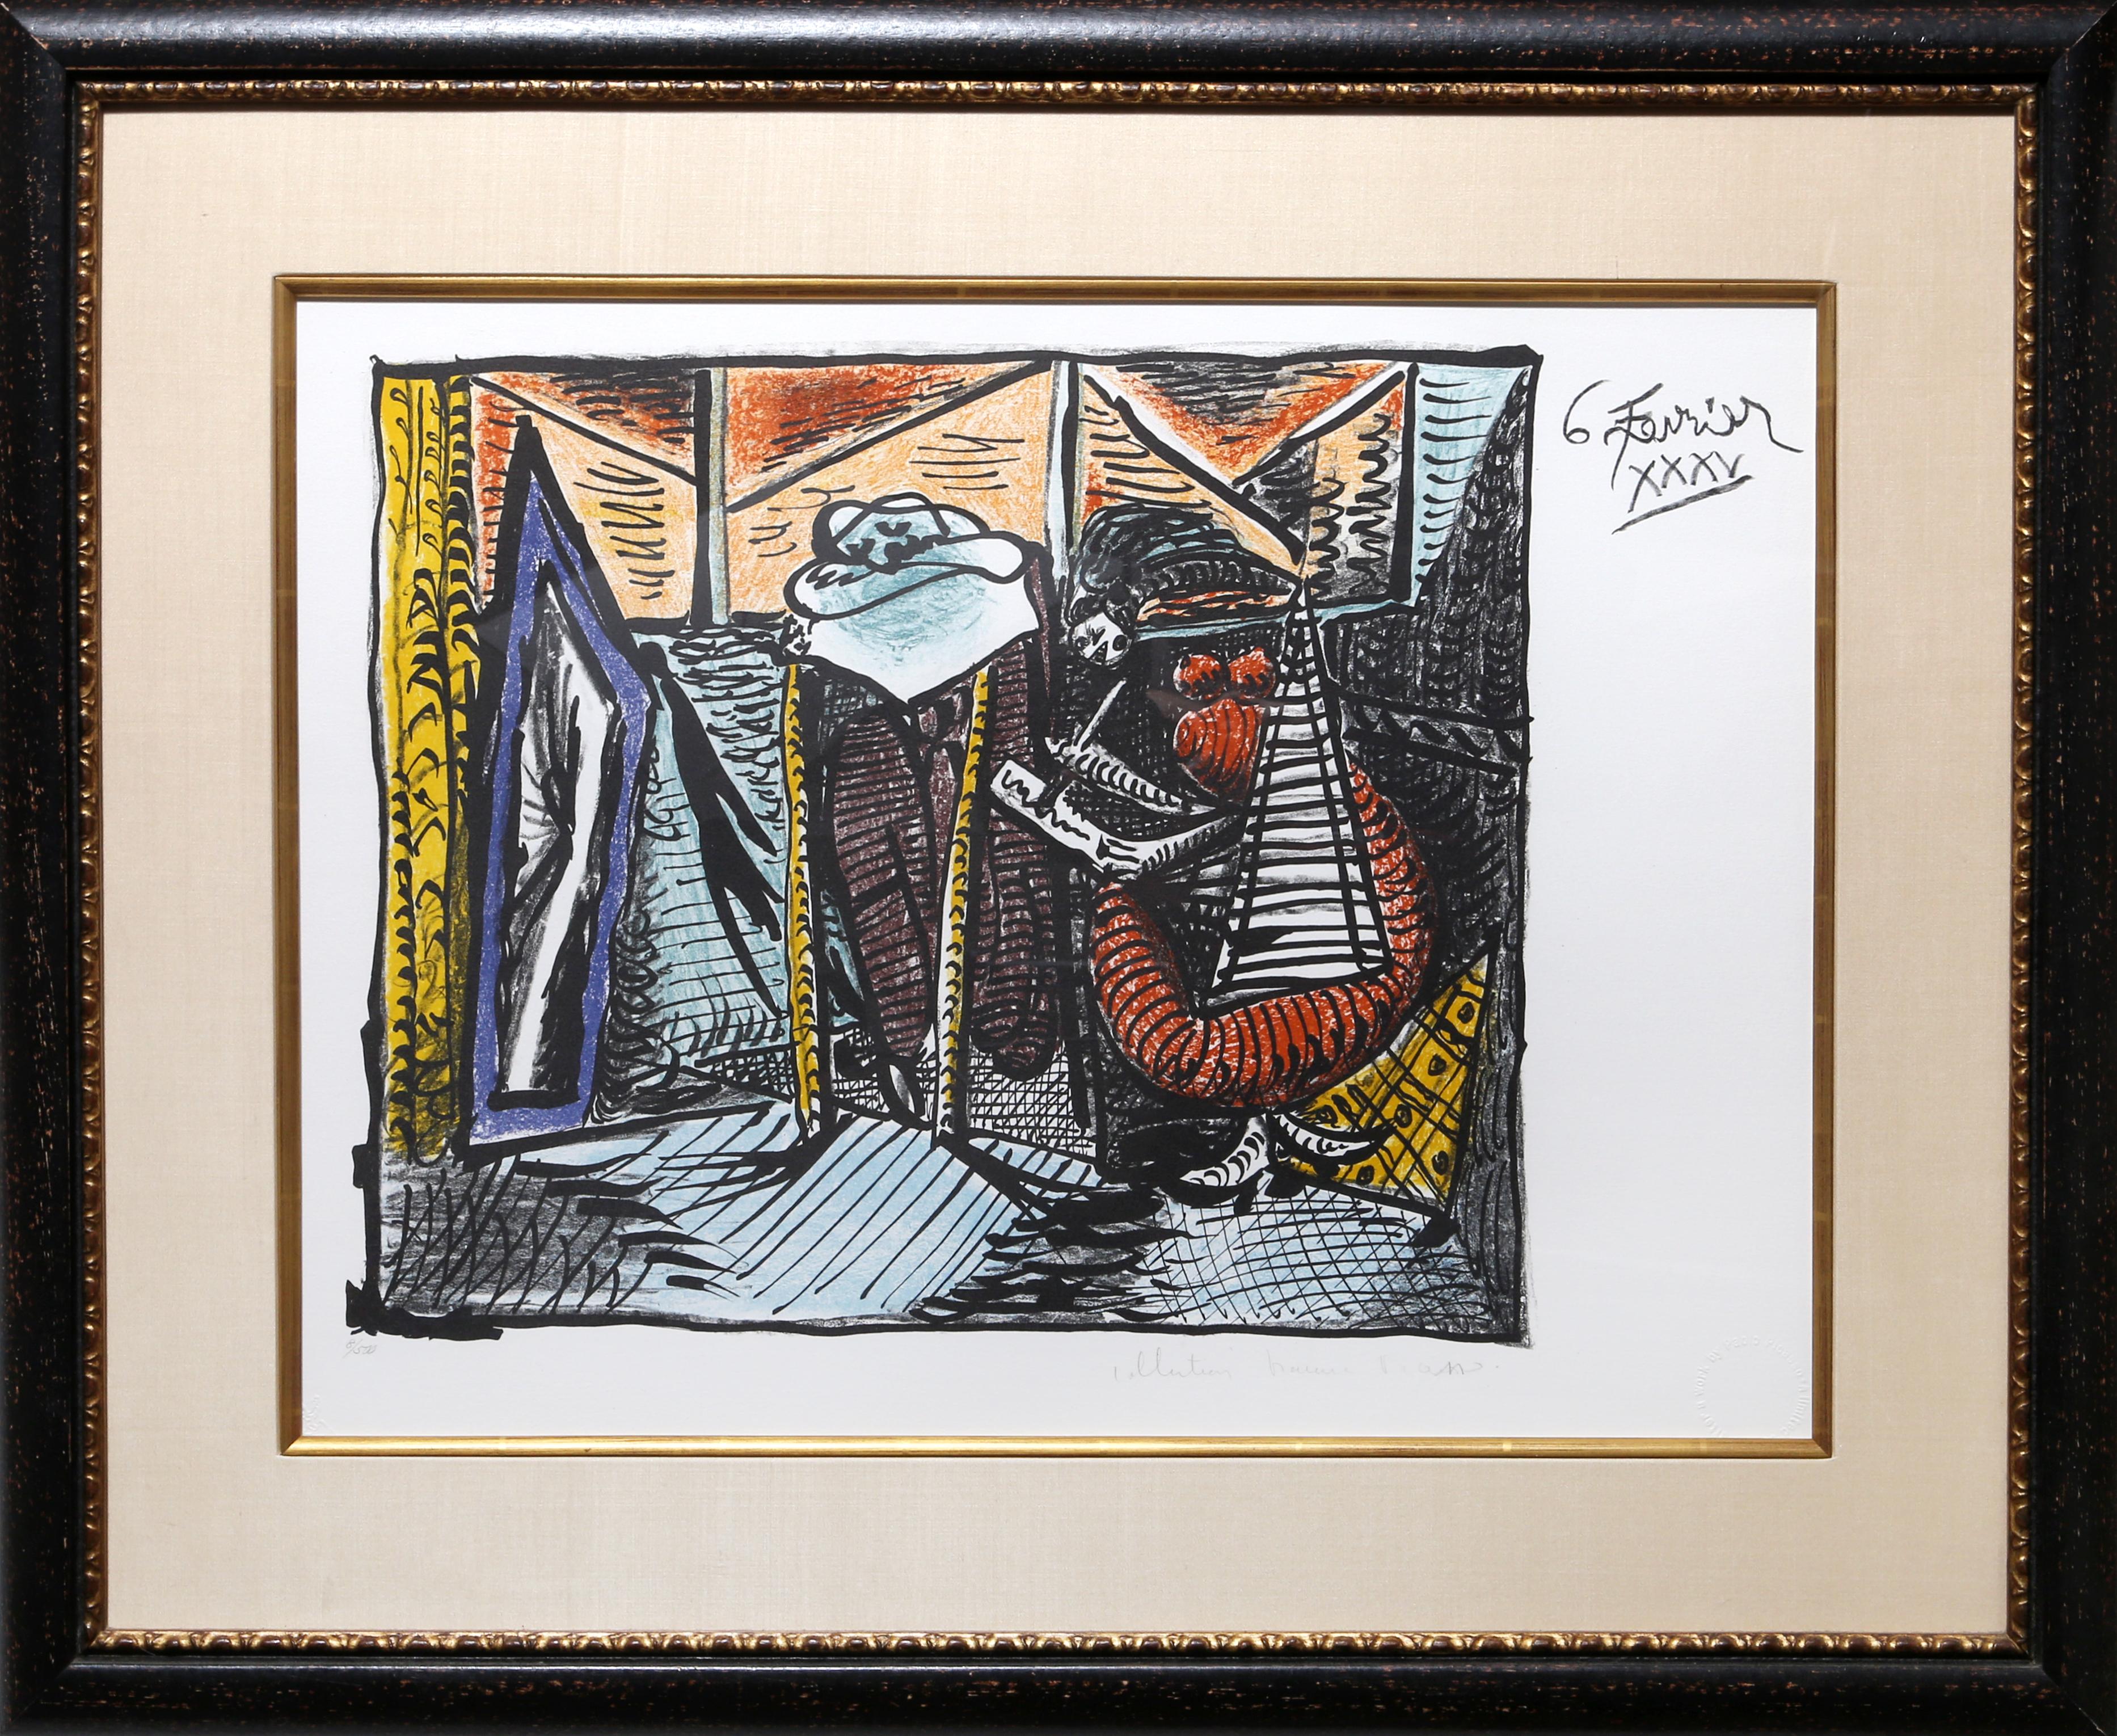 A lithograph from the Marina Picasso Estate Collection after the Pablo Picasso painting "Femme Dessinant, Femme Assoupi".  The original painting was completed in 1935. In the 1970's after Picasso's death, Marina Picasso, his granddaughter,